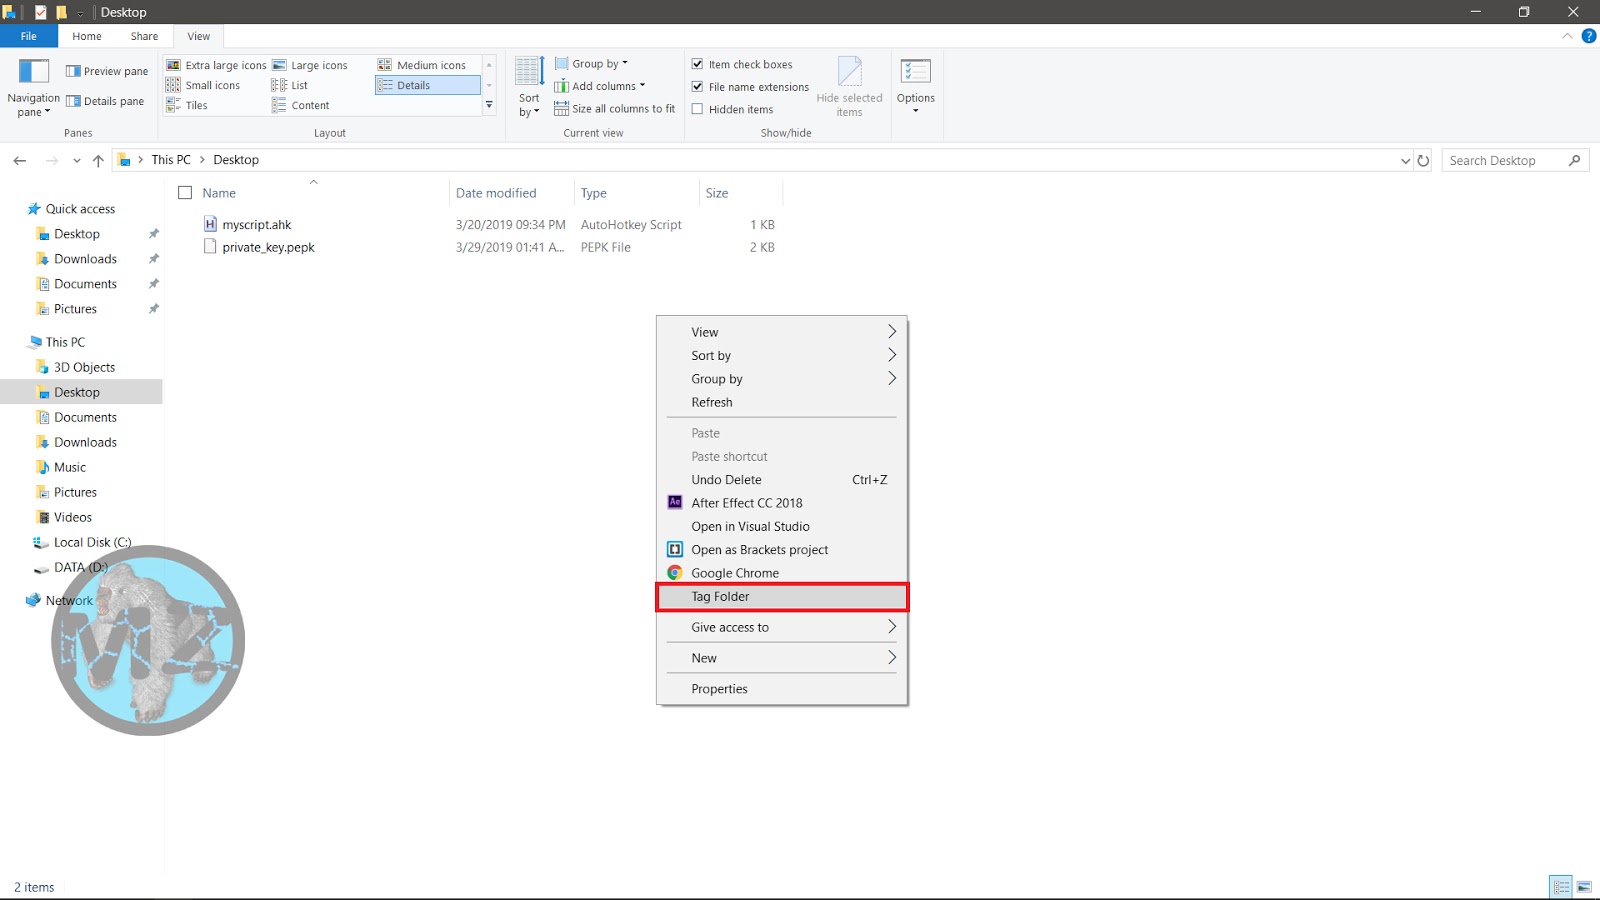 How to Tag Folders / Add Comment in Windows 10 - MZ.COM